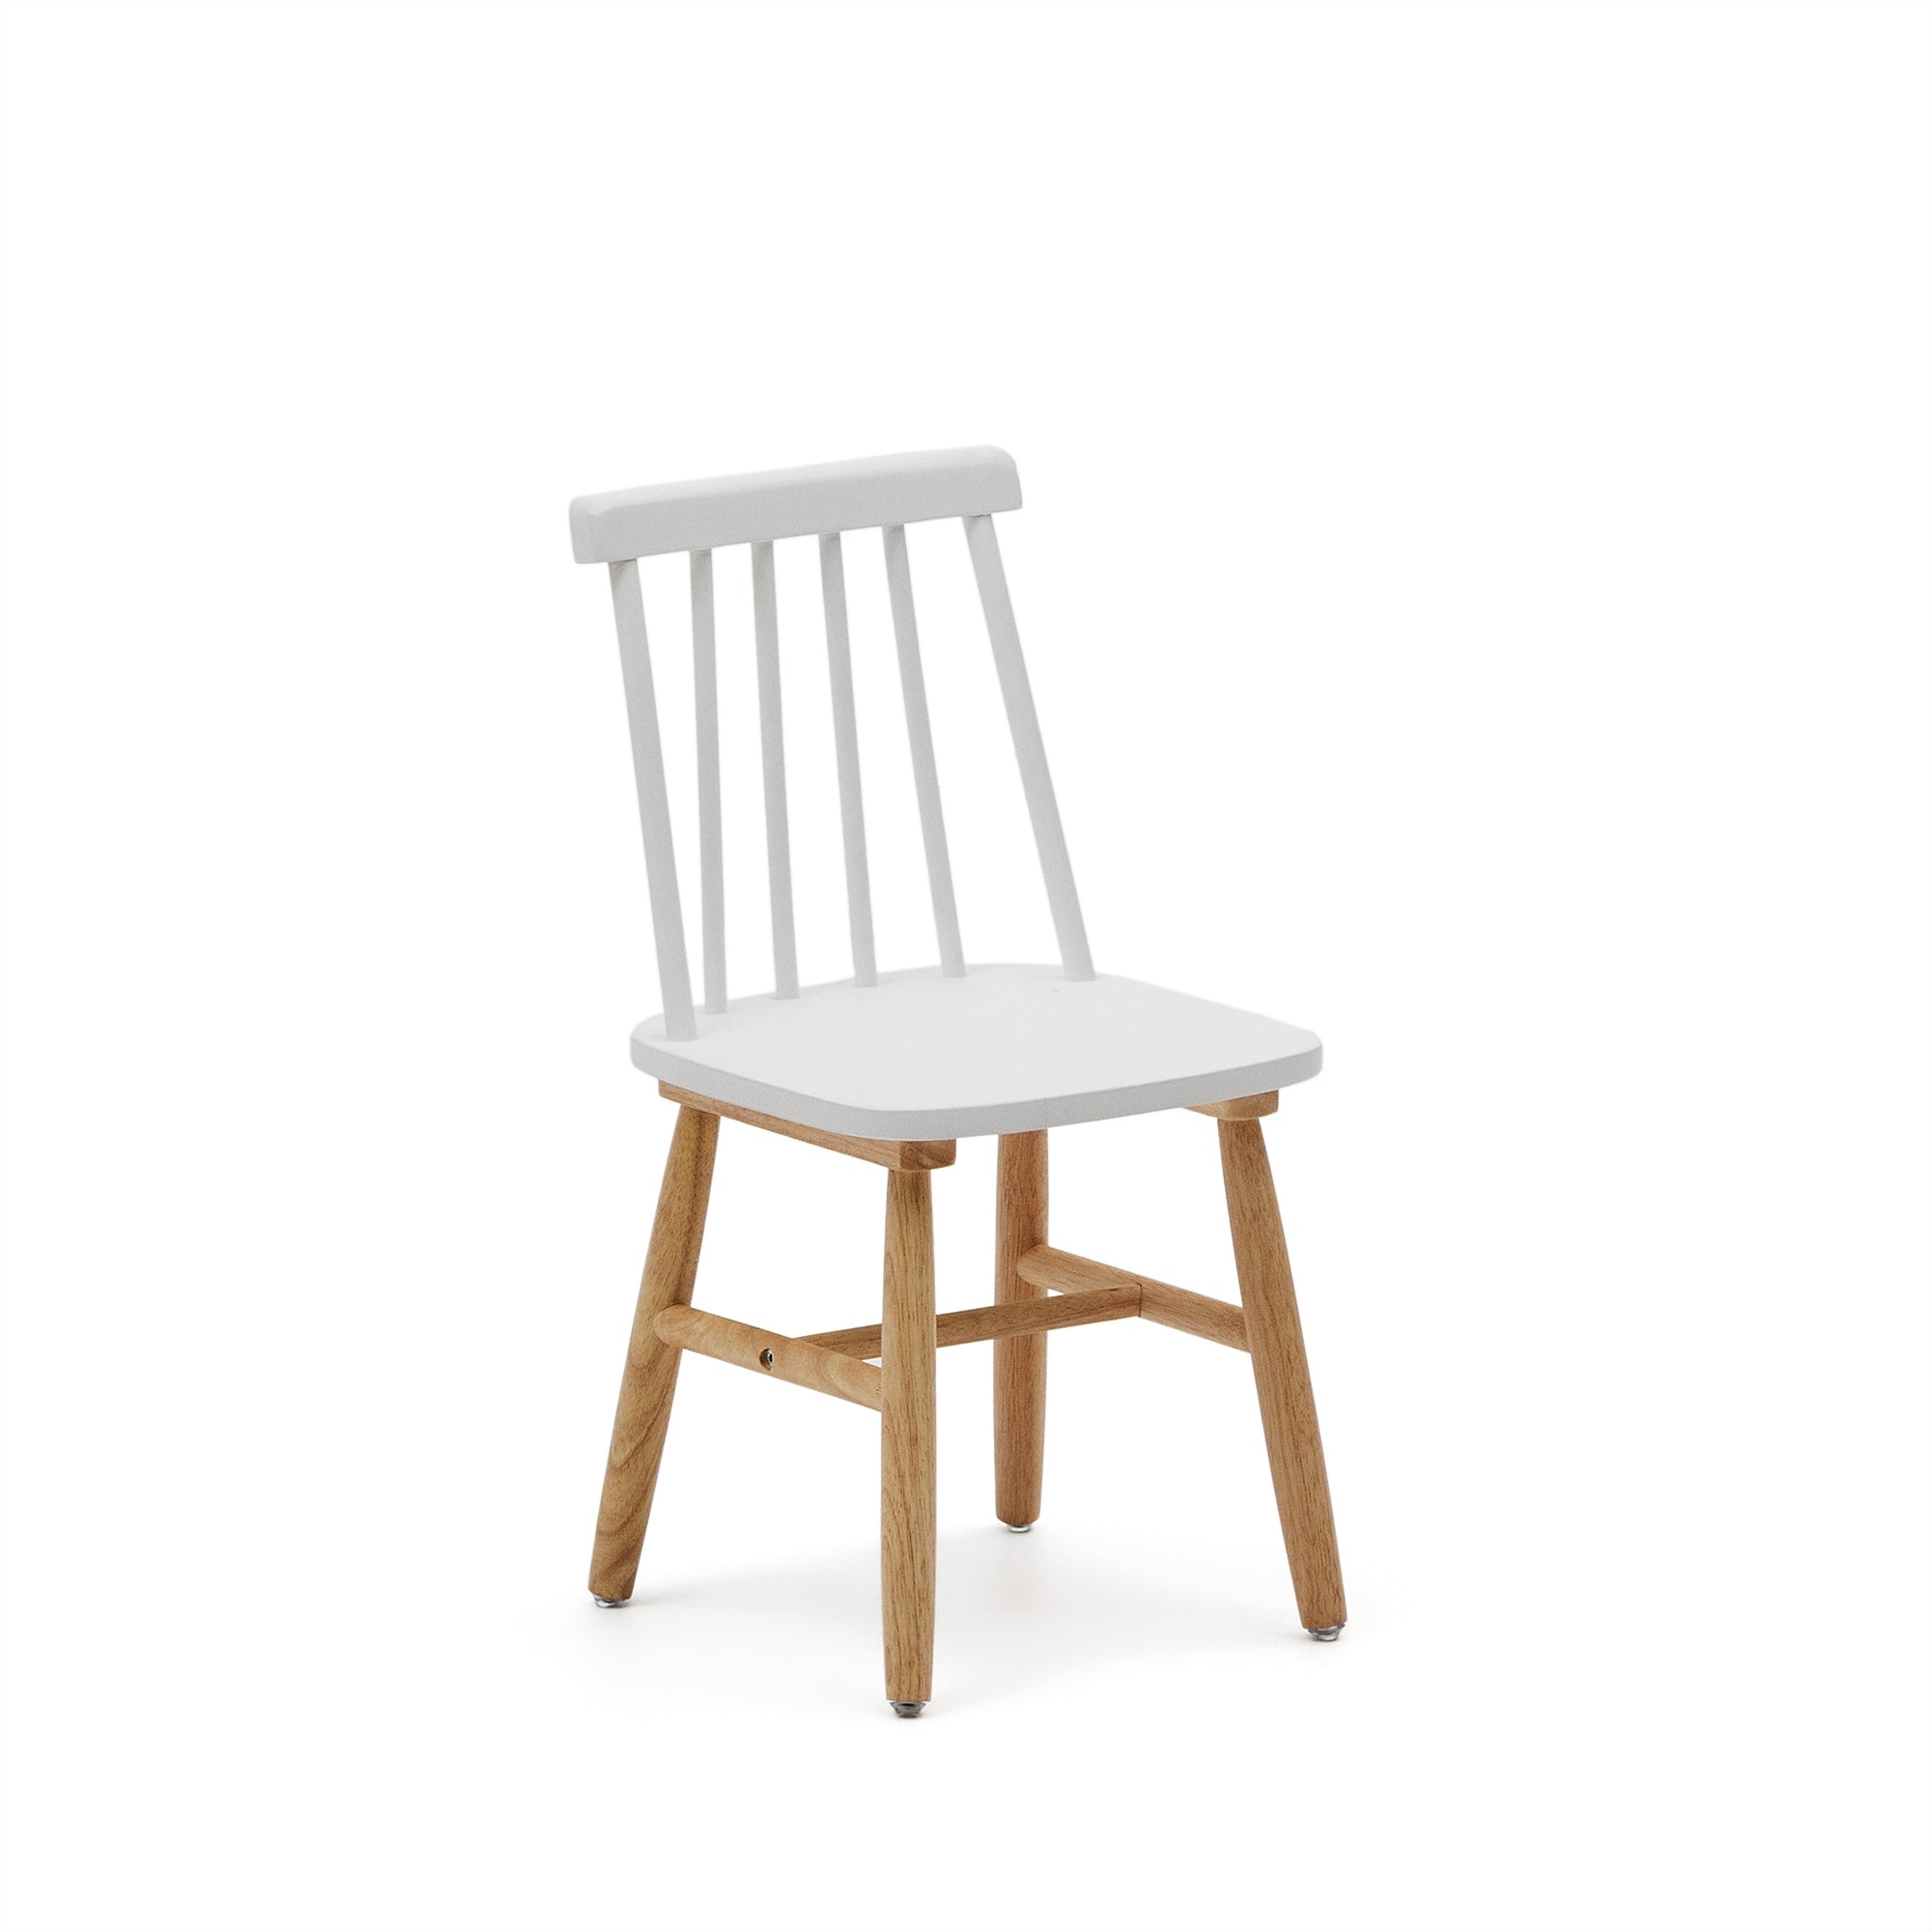 Tressia kids chair in solid rubber wood with white and natural finish